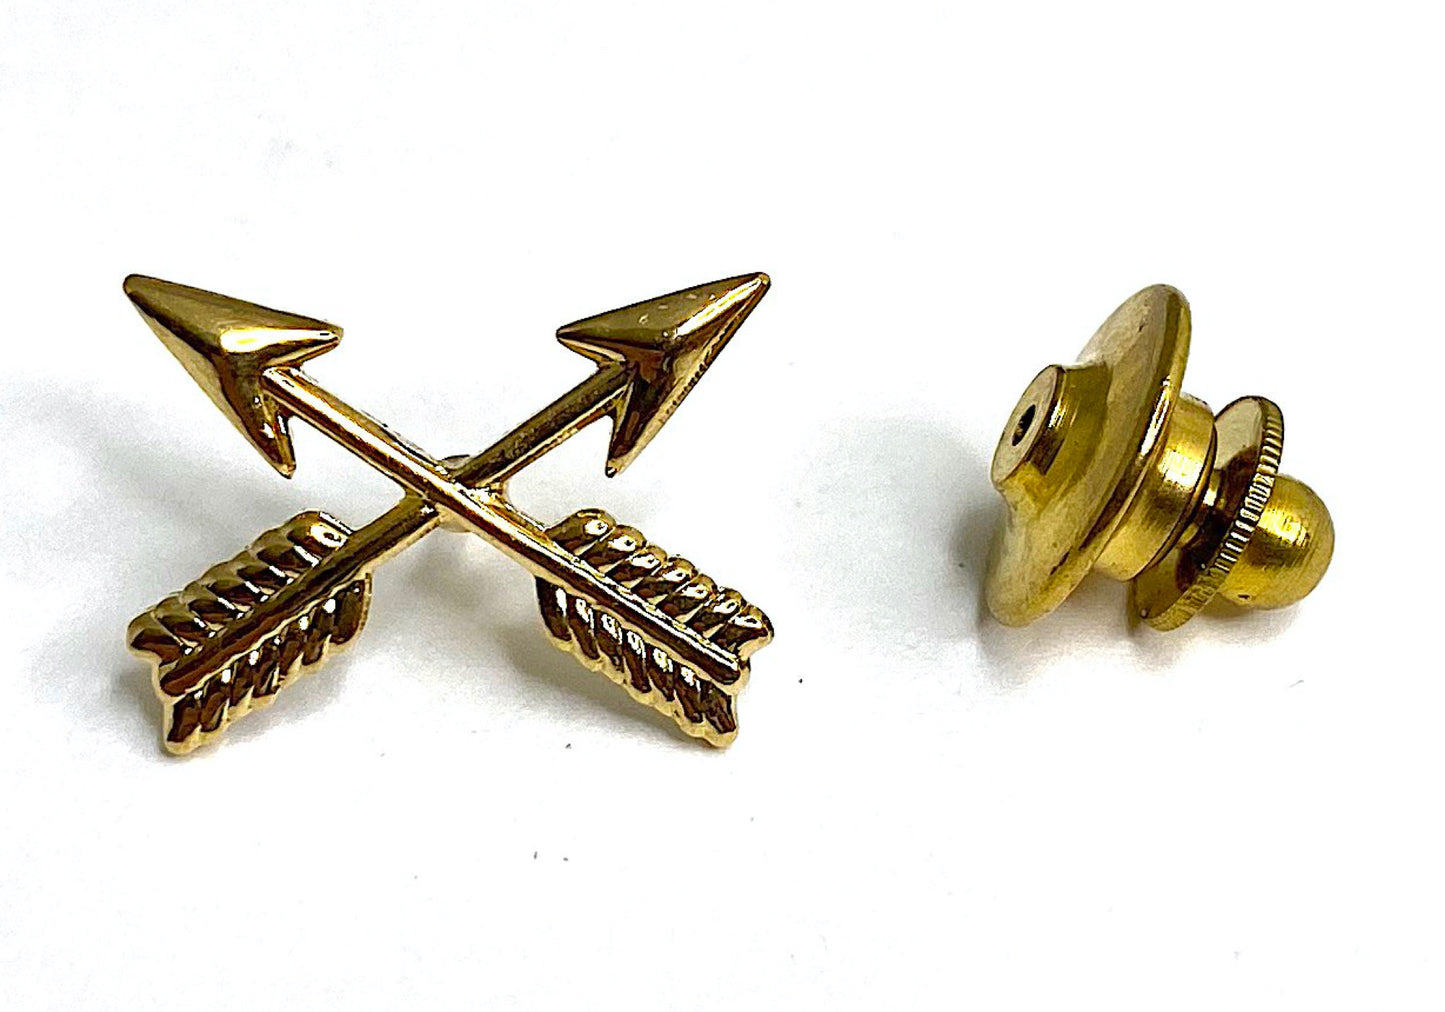 Special Forces Lapel Pin